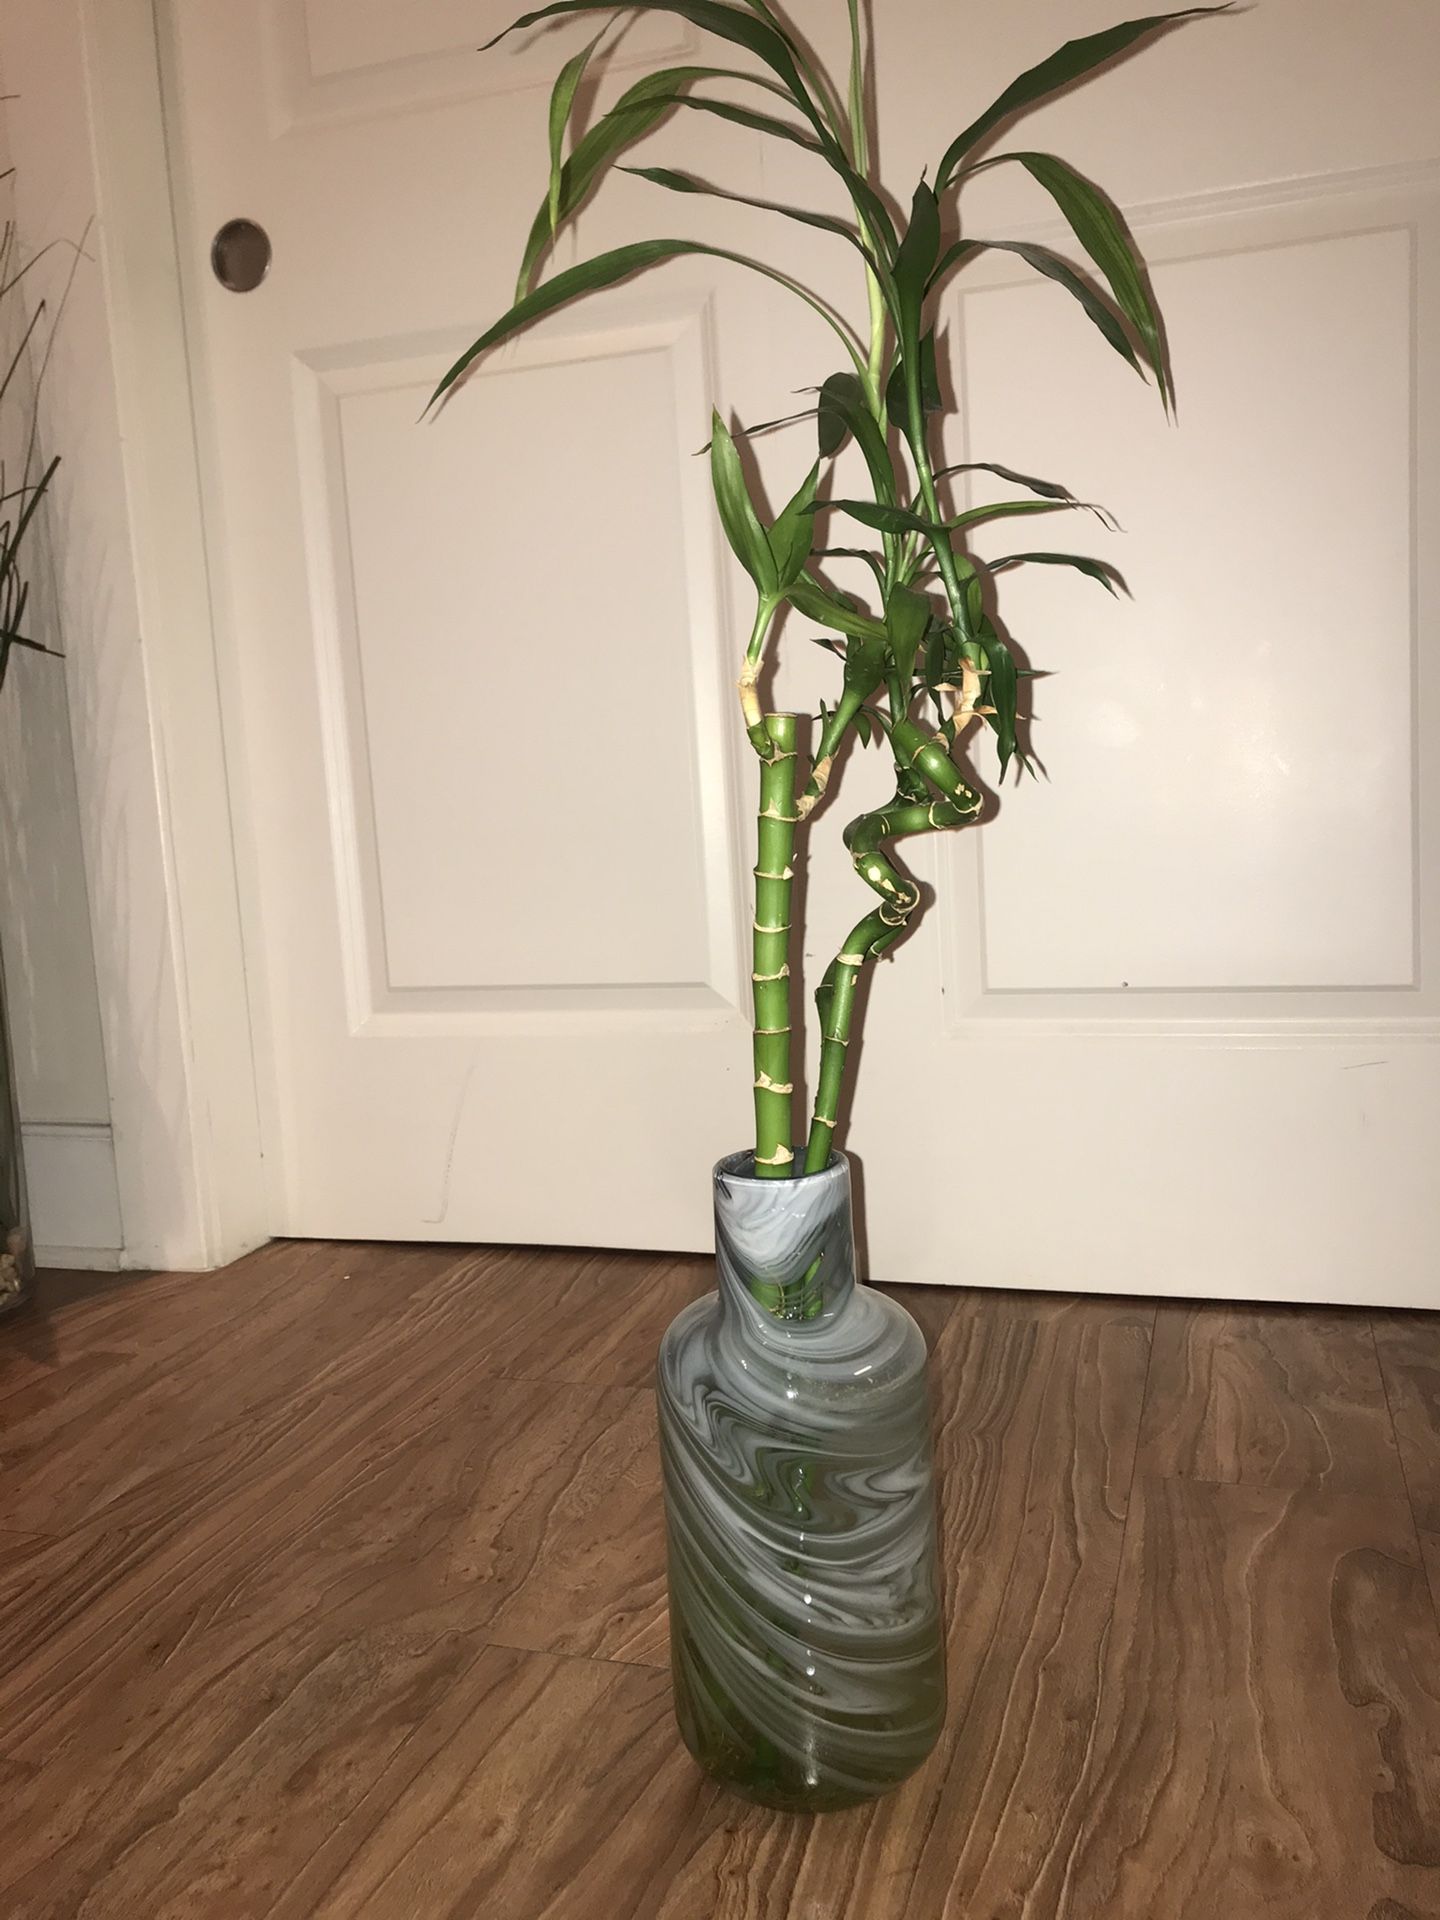 Blue vase with plants